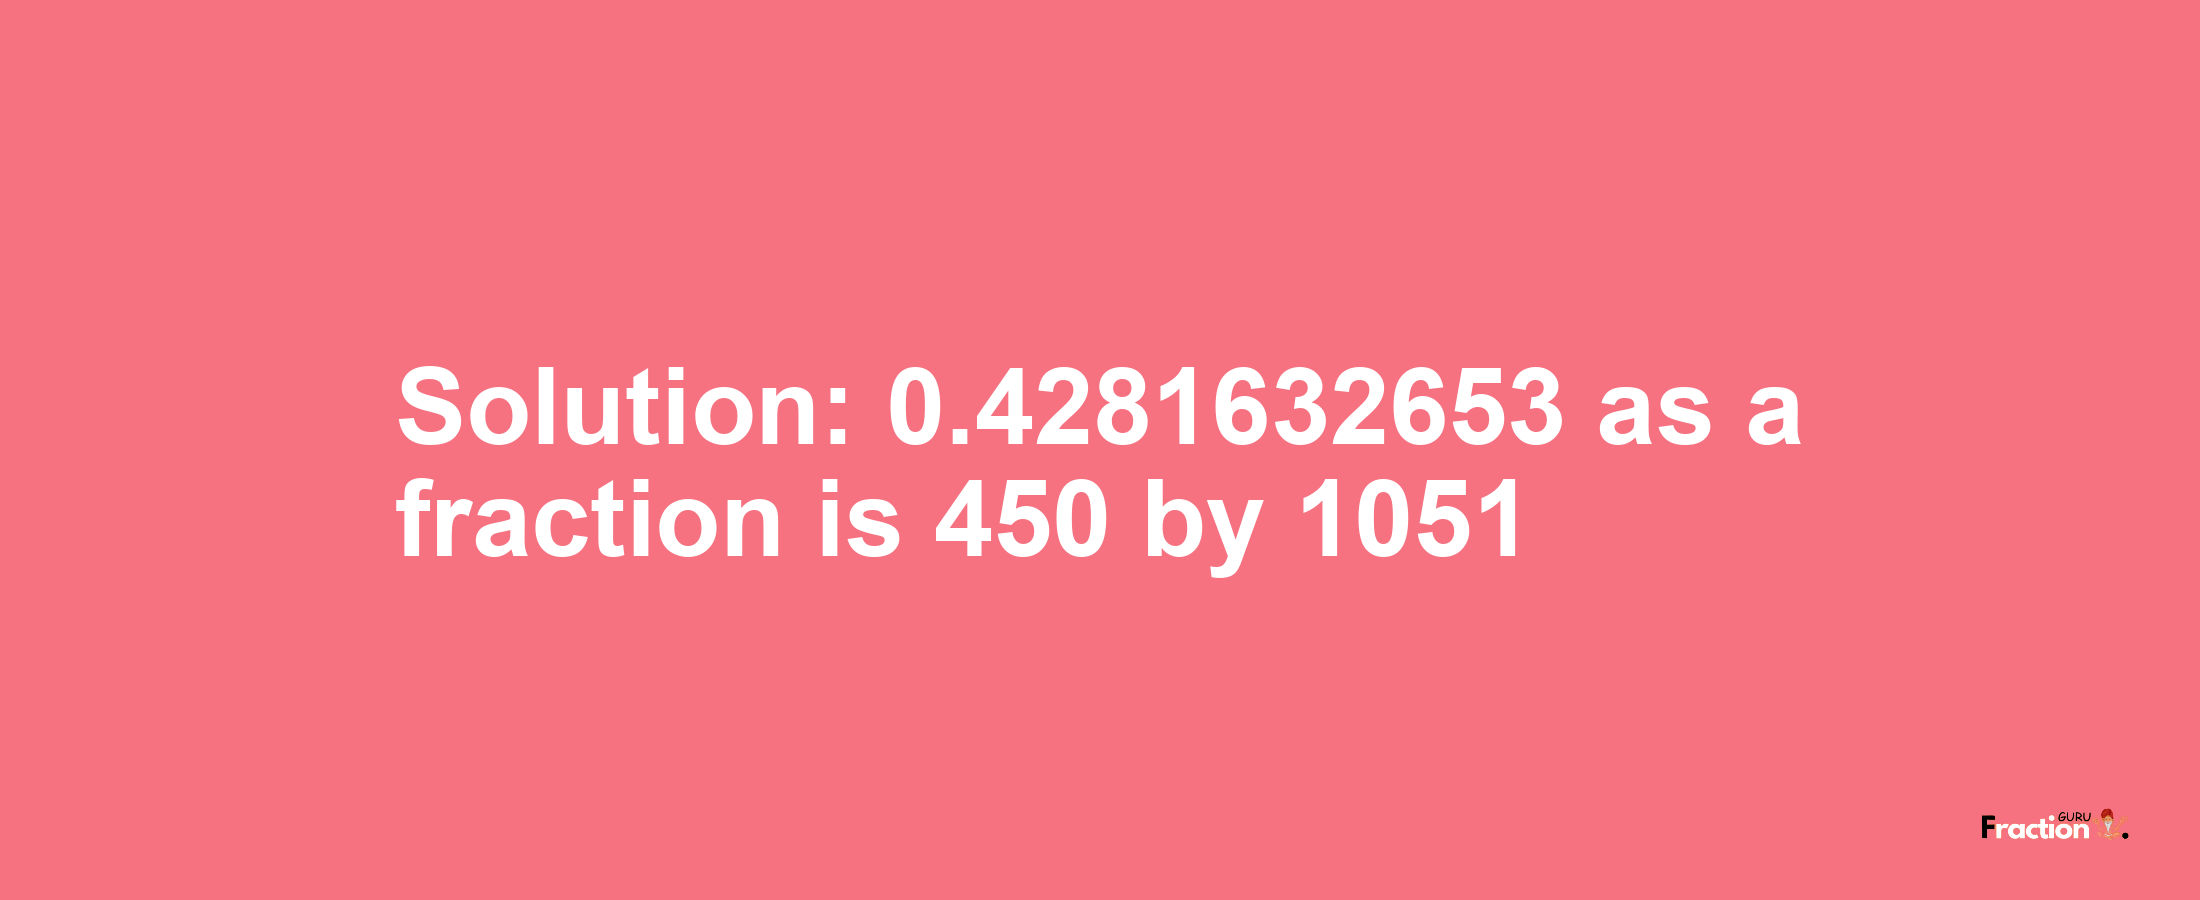 Solution:0.4281632653 as a fraction is 450/1051